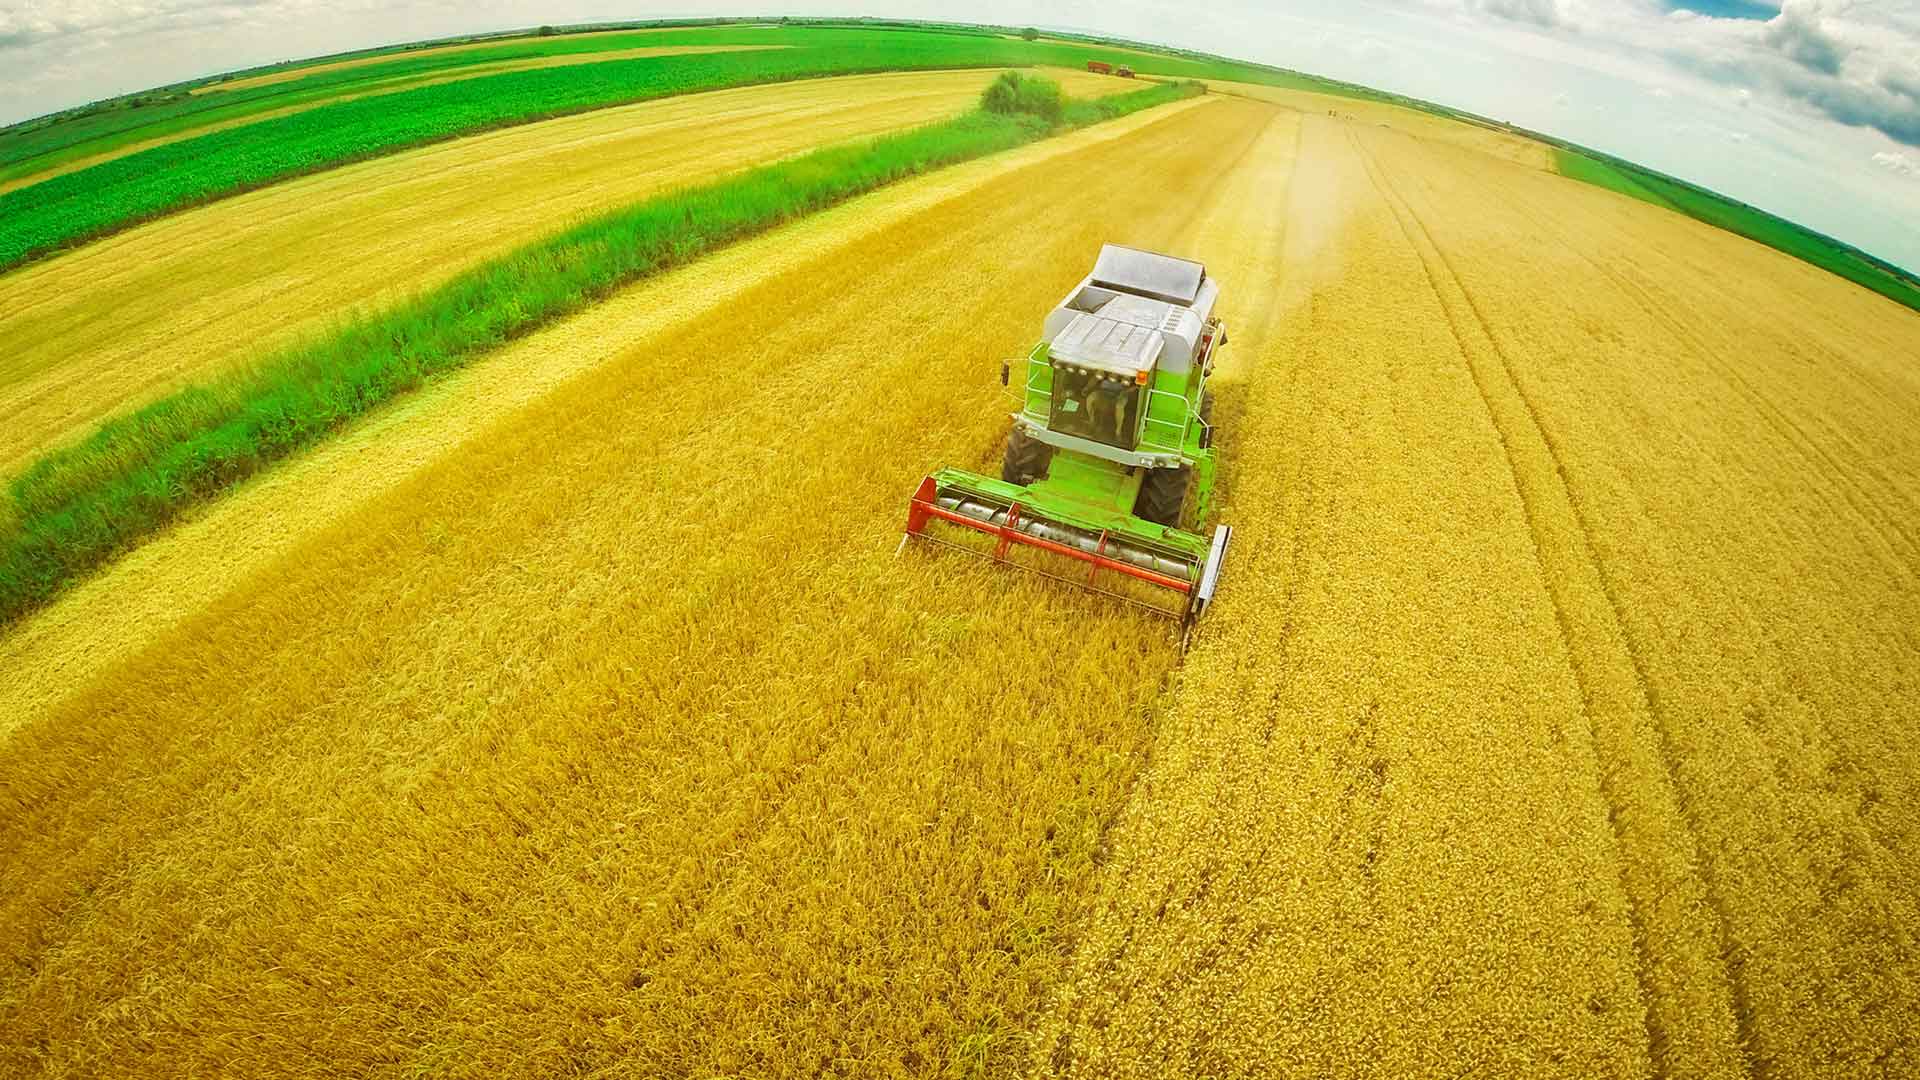 Aerial shot of a combine harvester in a corn field